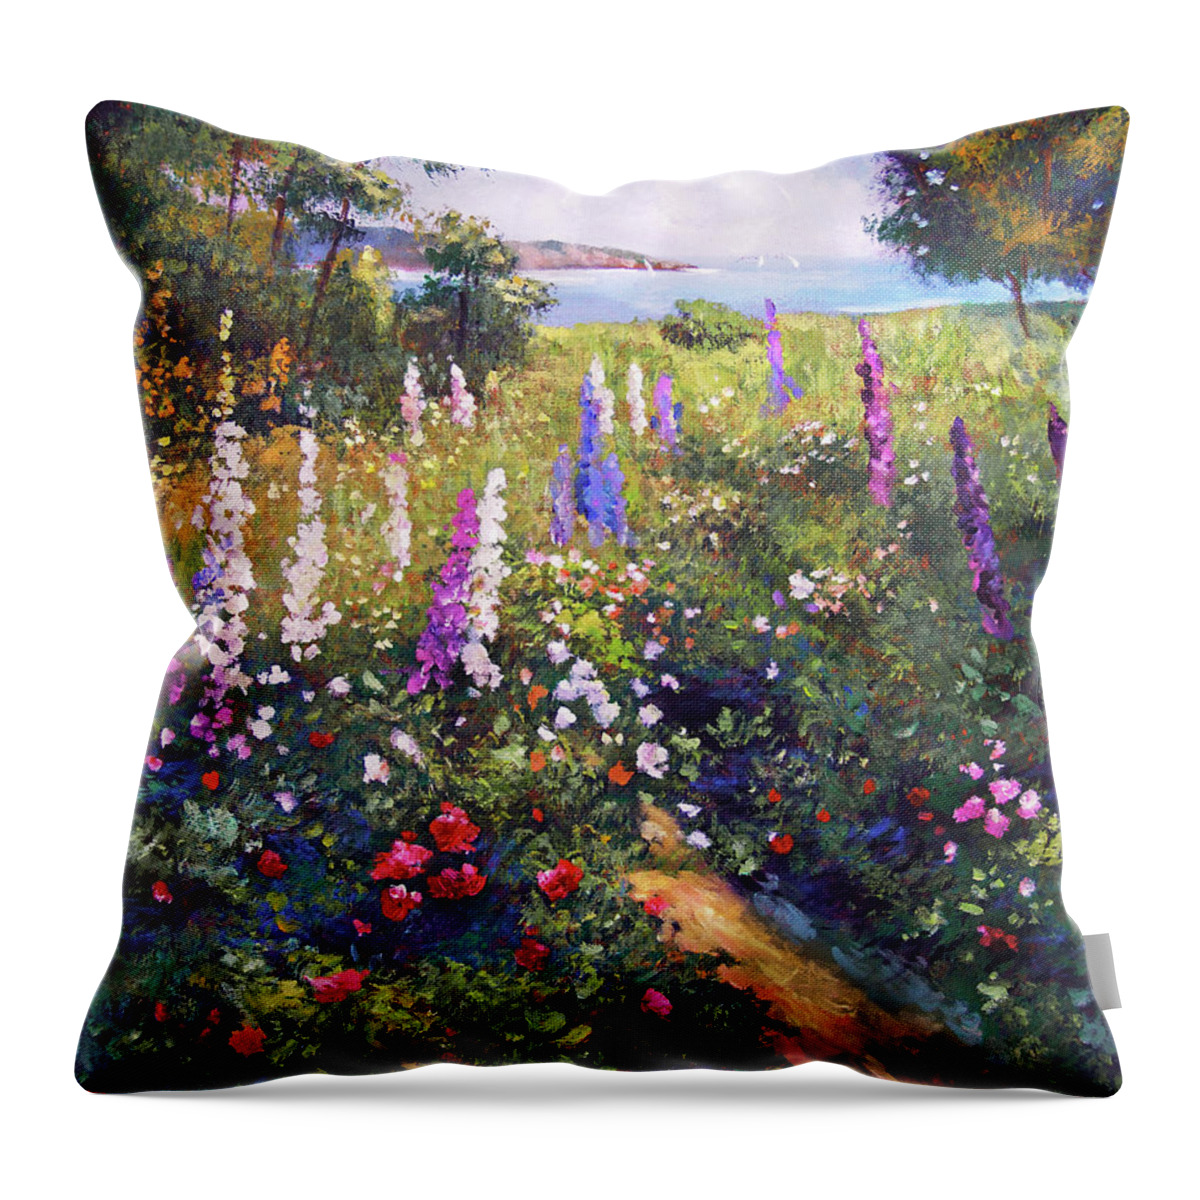 Landscape Throw Pillow featuring the painting Field Of Hollyhocks by David Lloyd Glover